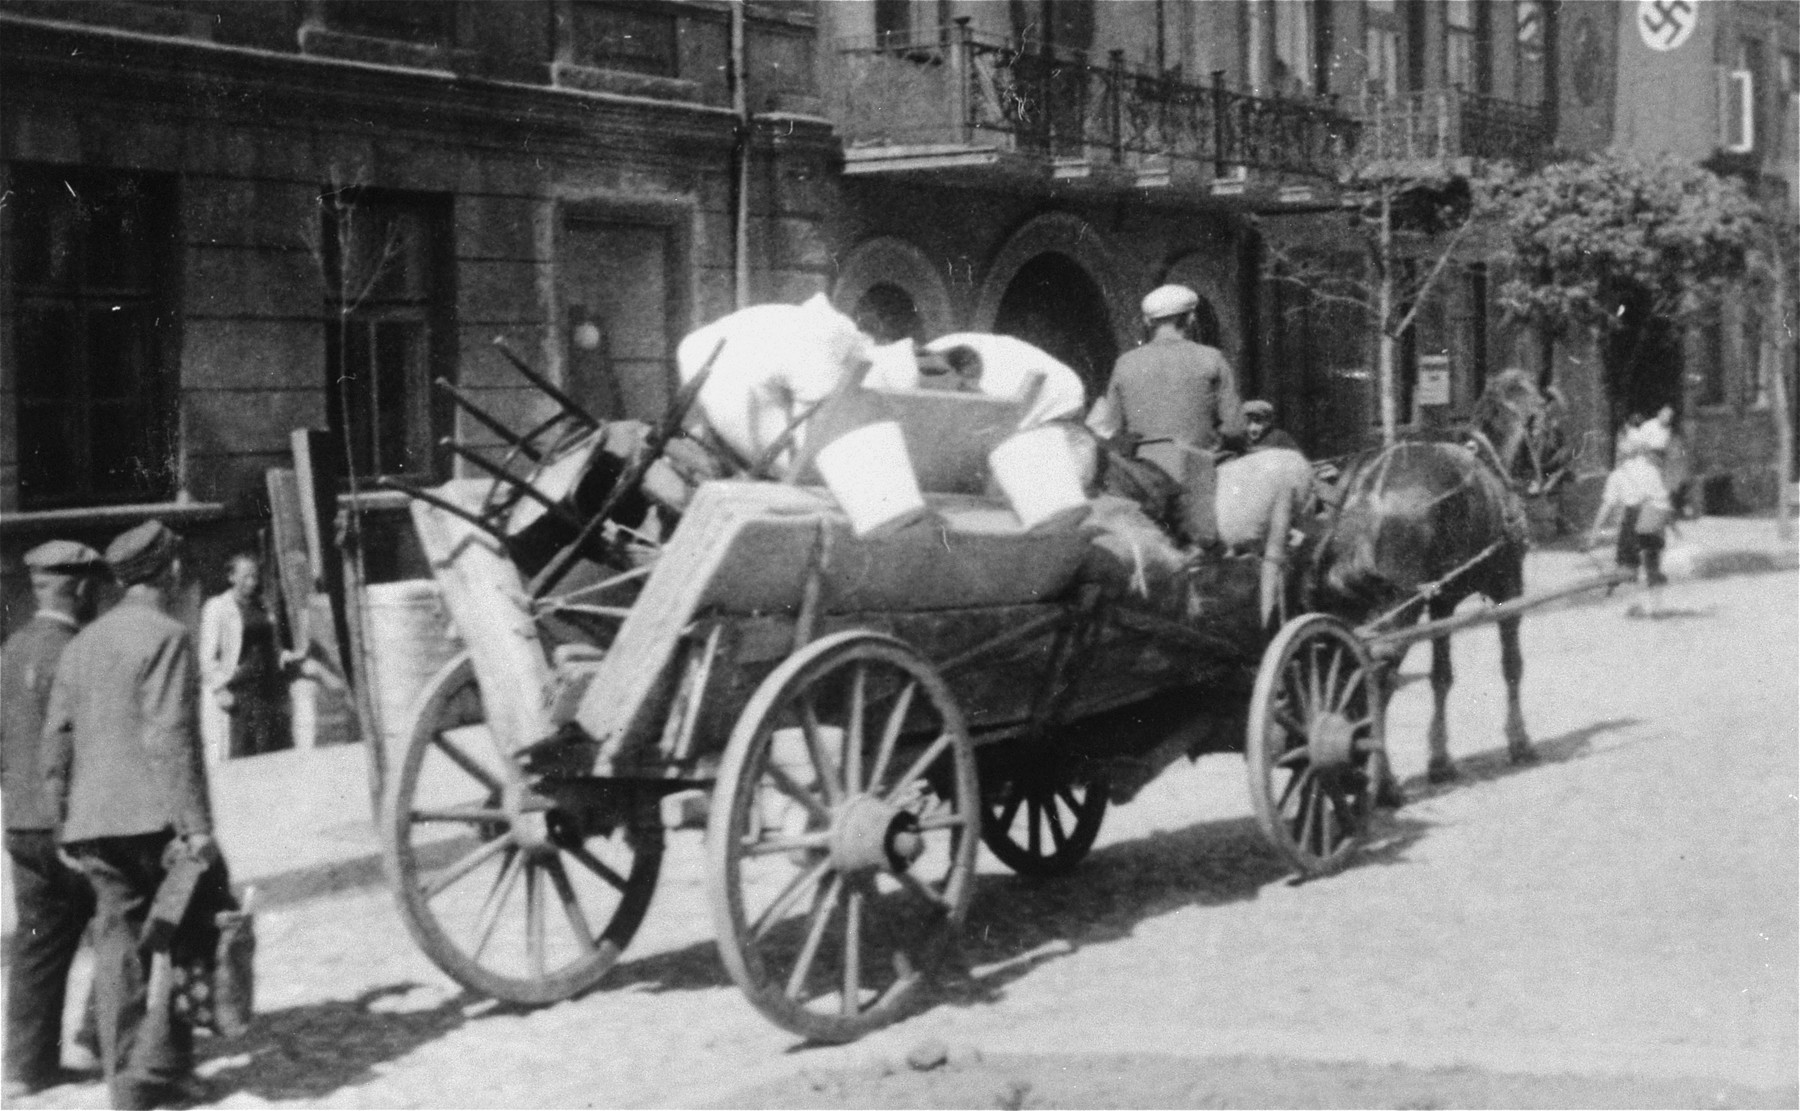 A Jew drives a horse-drawn wagon bearing furniture and household goods along a street in Plonsk.

The original German caption reads: "Juden raus!"